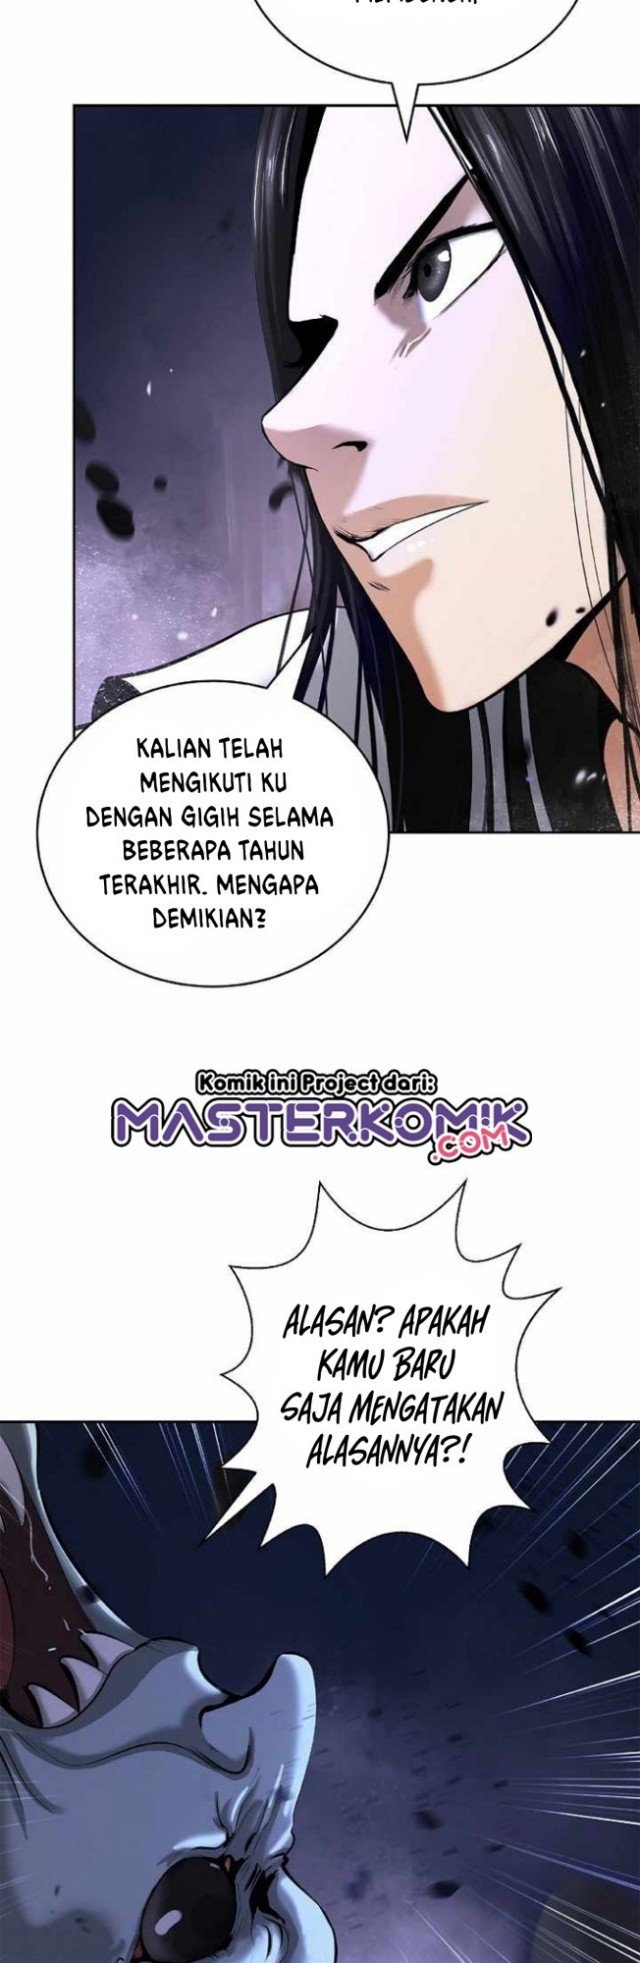 Cystic Story Chapter 49 End